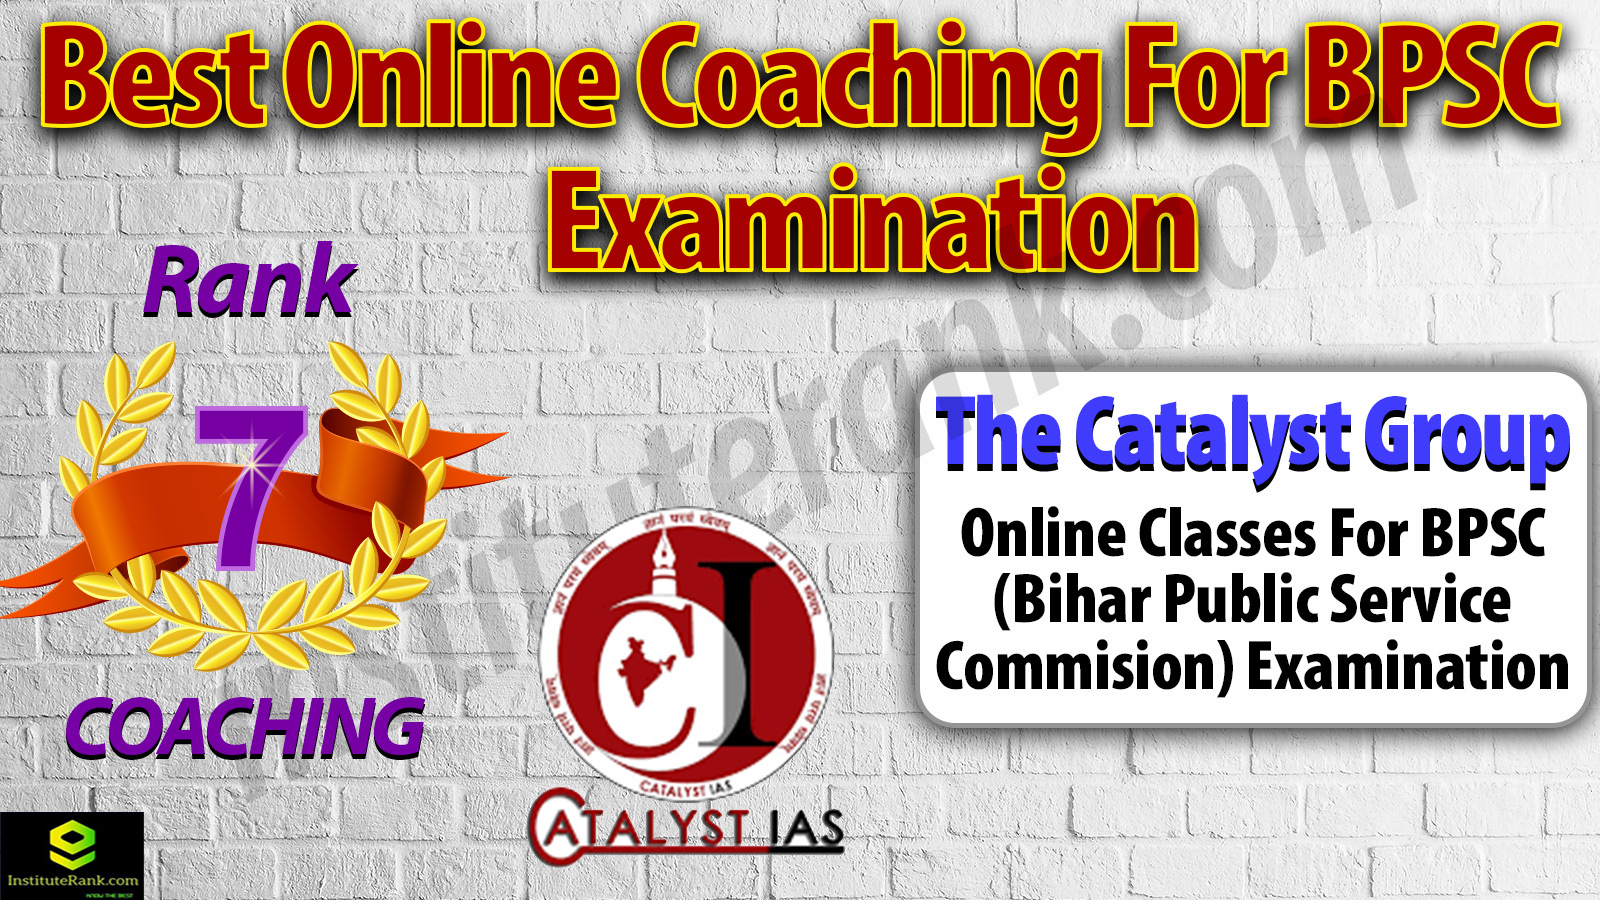 Top Online Coaching for BPSC Exam Preparation